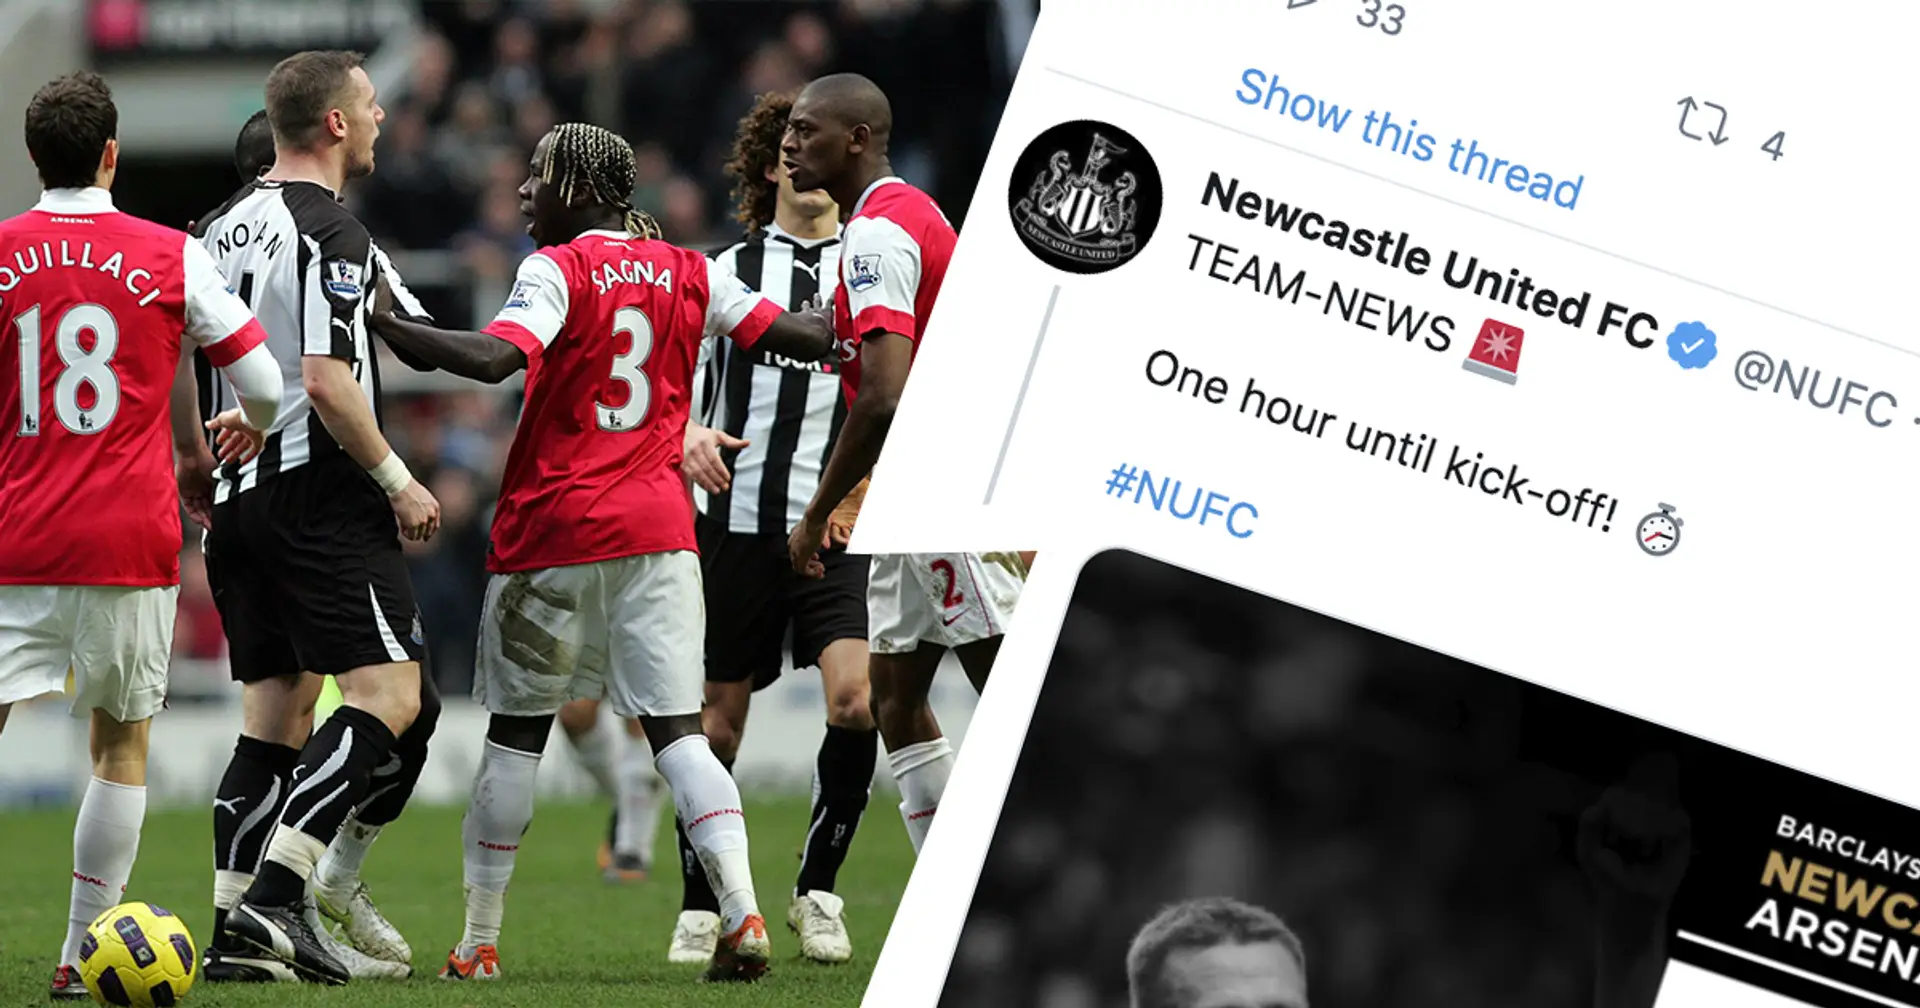 Van Persie's brace, goal by the late Tiote: Newcastle reminisce about classic 4-4 vs Arsenal by live-tweeting game updates